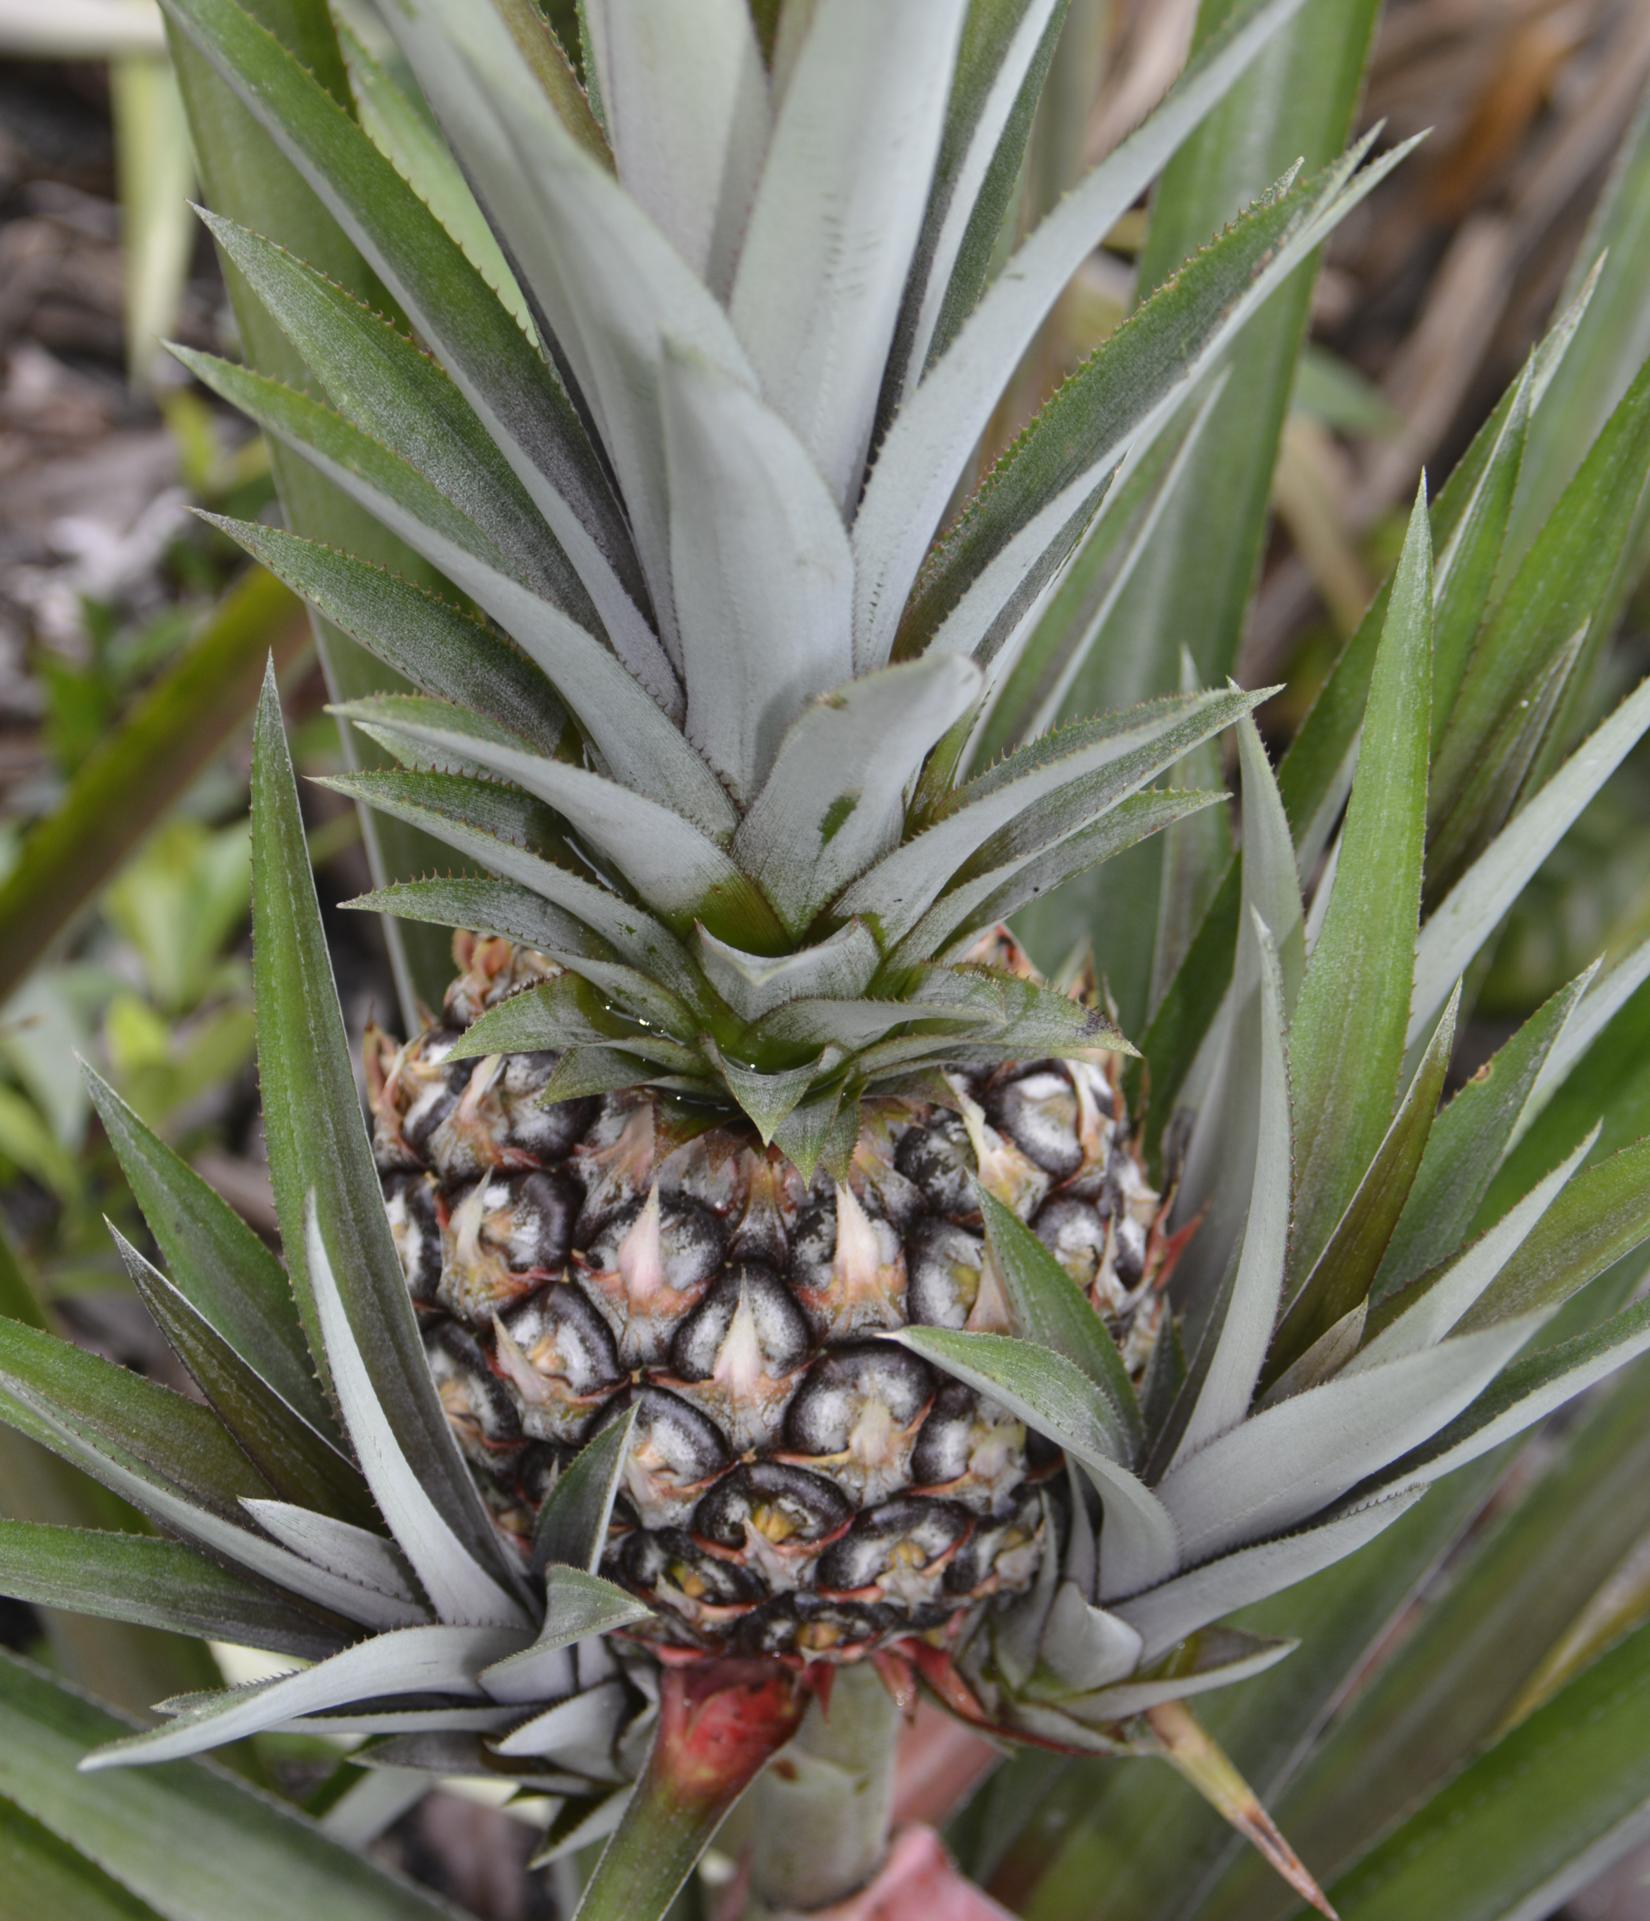 Young round Surinamese pineapple